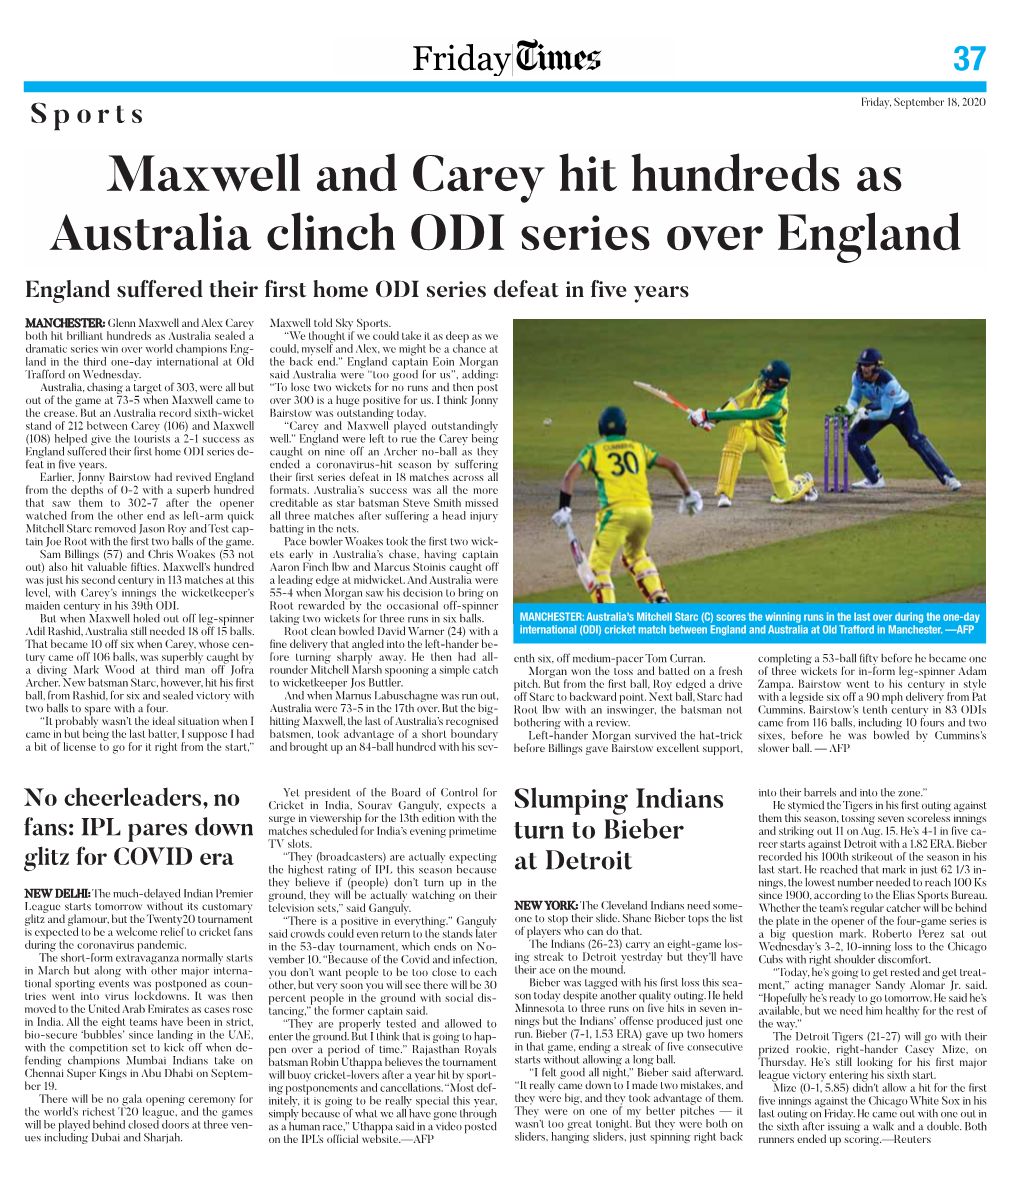 Maxwell and Carey Hit Hundreds As Australia Clinch ODI Series Over England England Suffered Their First Home ODI Series Defeat in Five Years